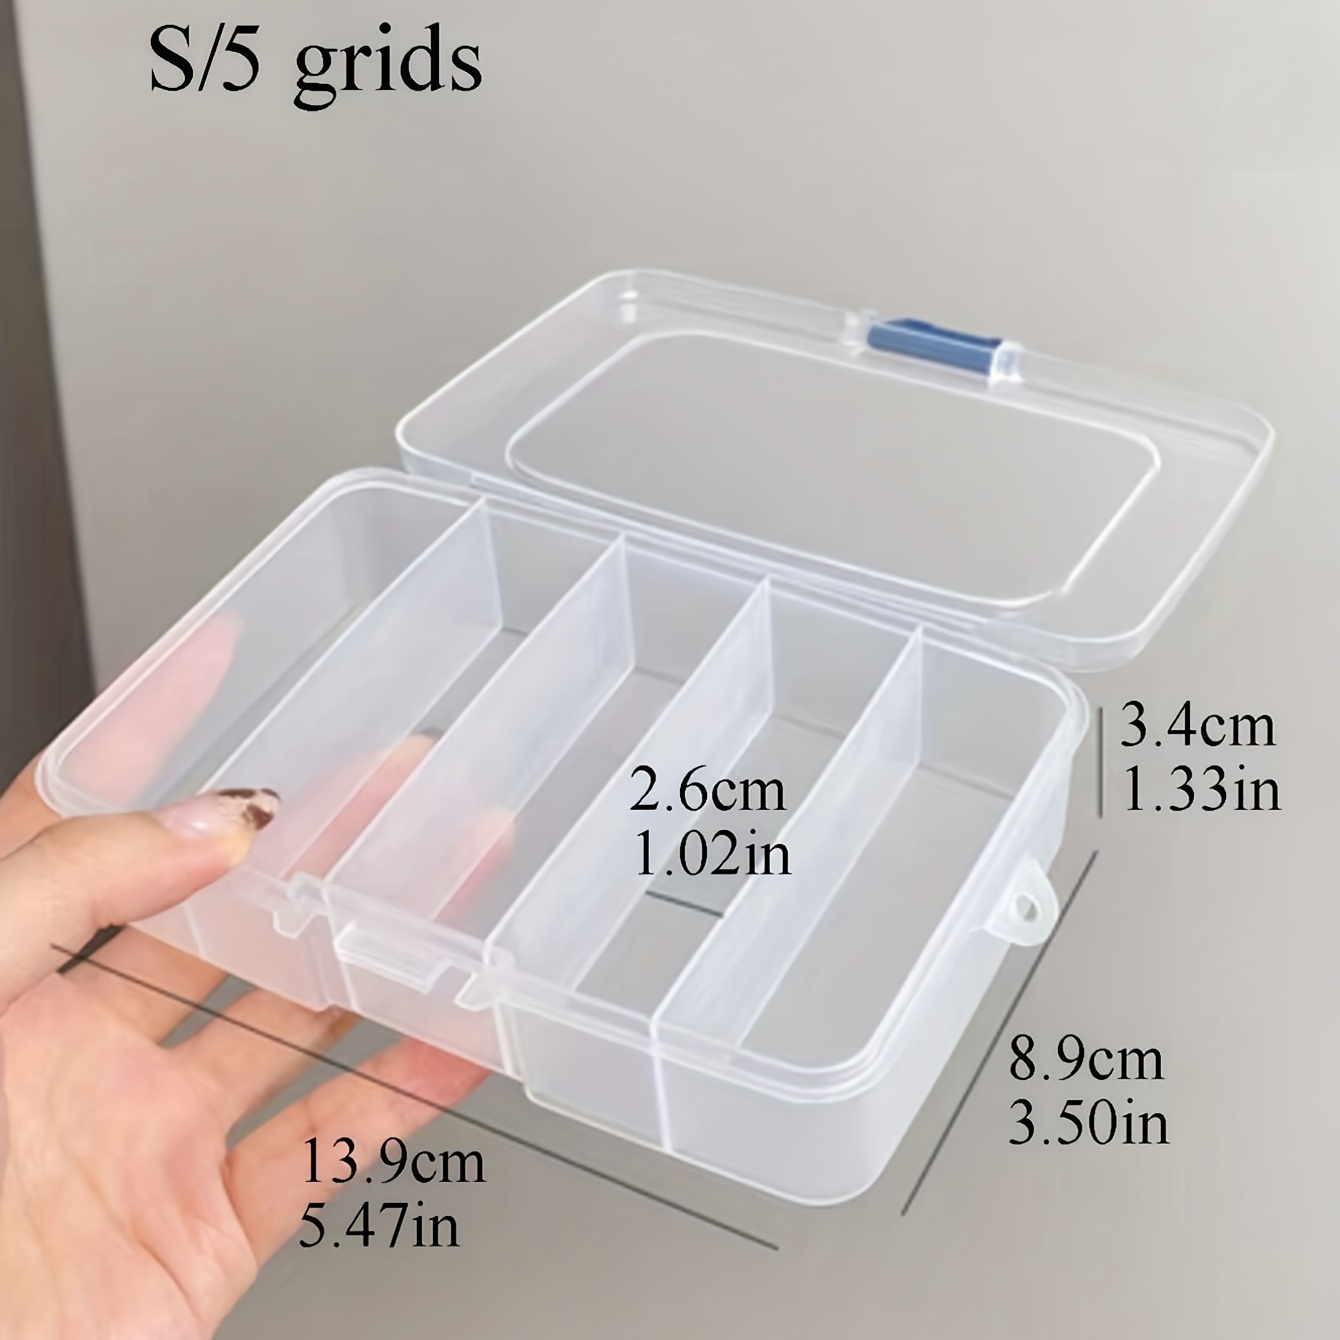 Noverlife 24 Grids Clear Plastic Organizer Box, Storage Container Jewelry  Box, Empty Earring Storage Organizer Display Case, Transparent Plastic Nail